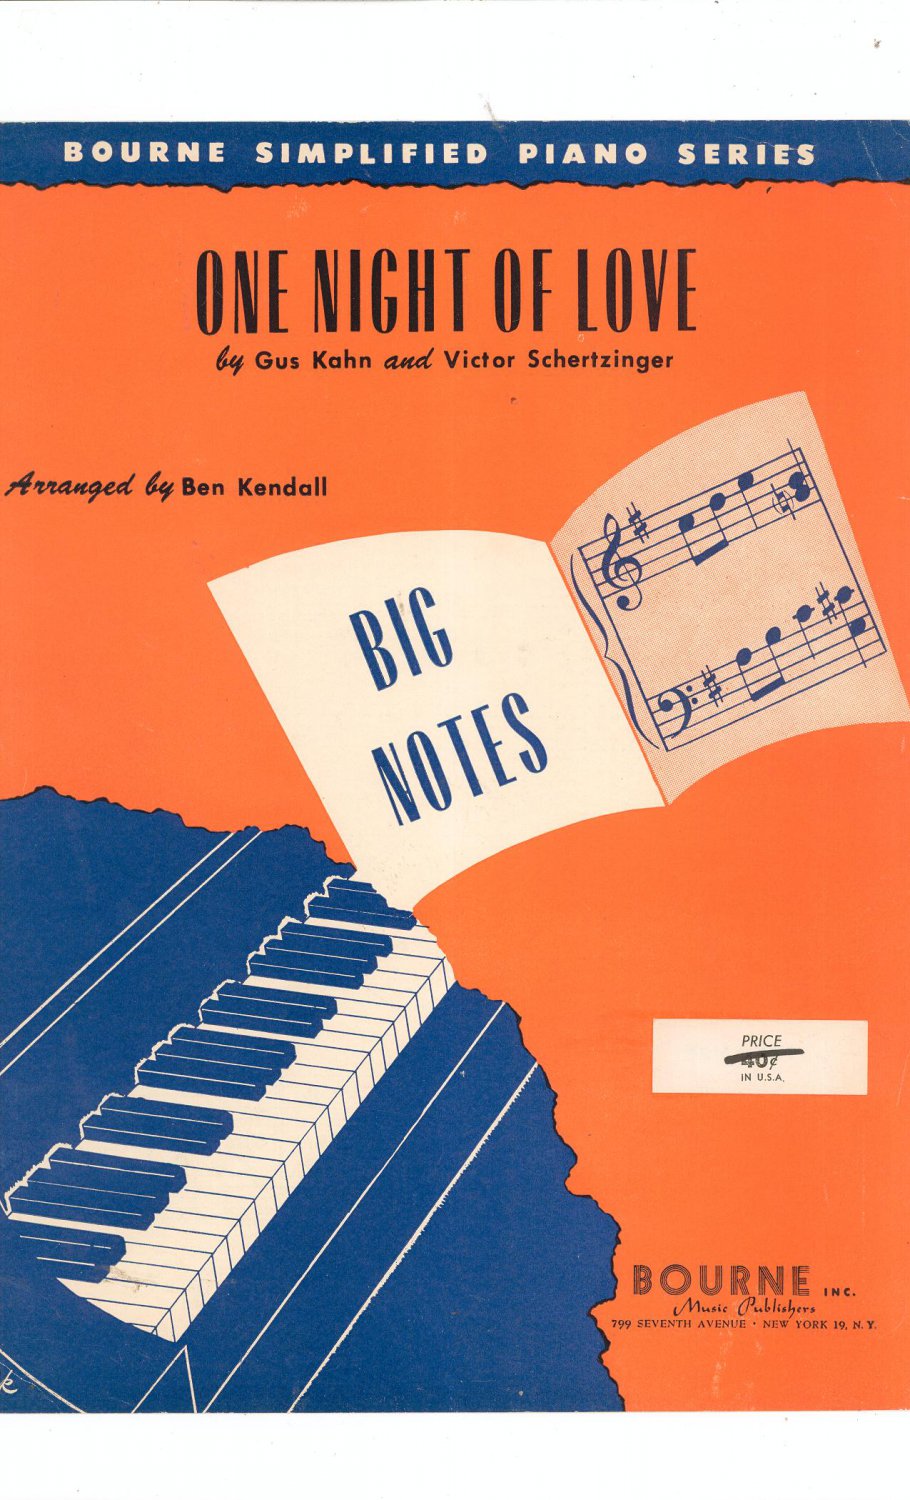 One Night Of Love Piano Sheet Music Vintage Bourne Inc.